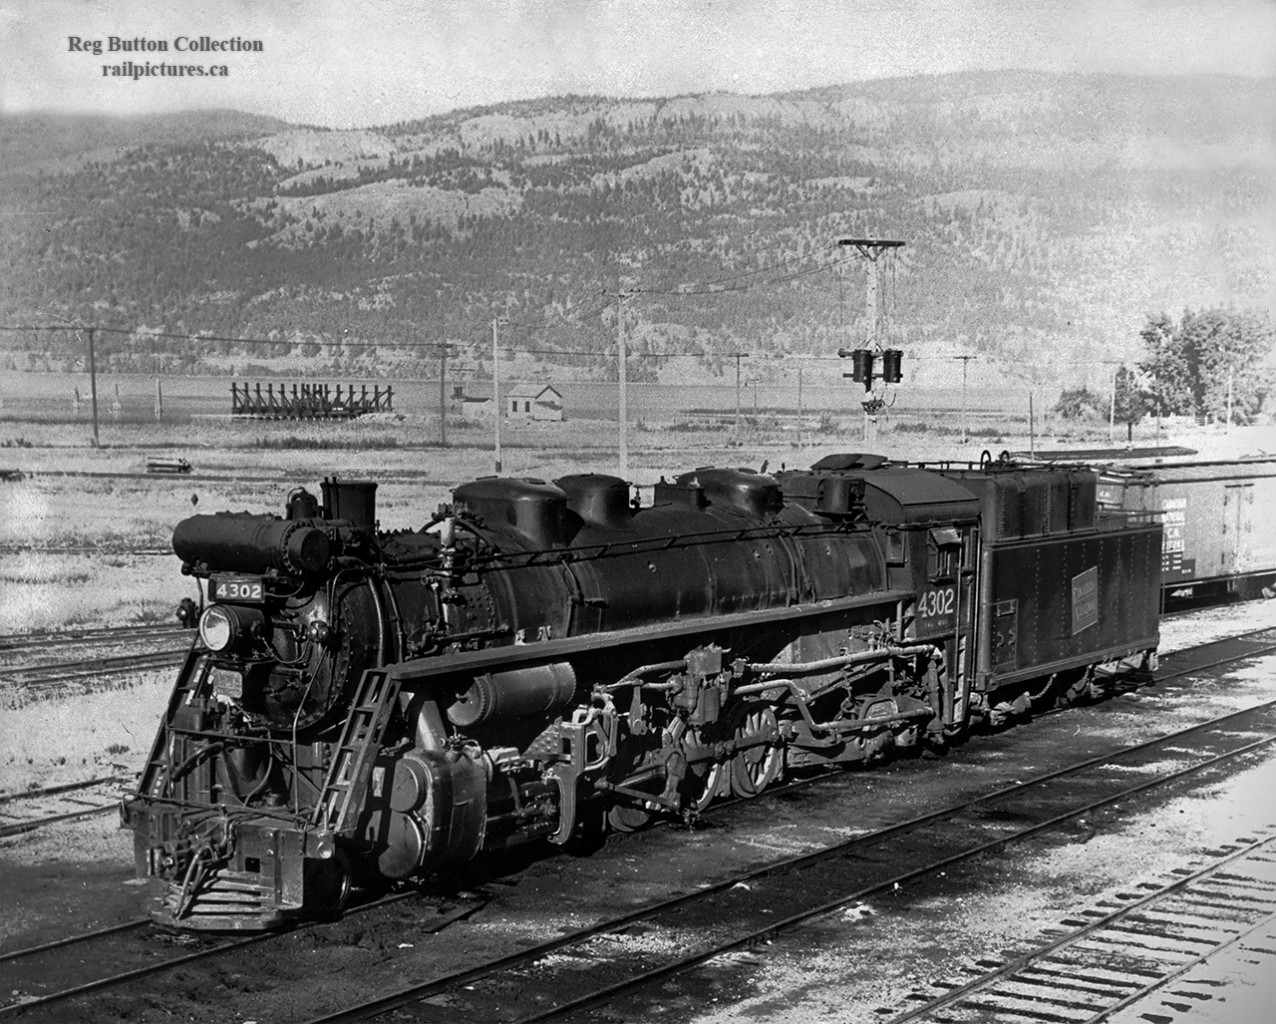 Tree covered mountains stand tall over Lake Okanagan and the town of Kelowna where we find CNR oil burner 4302 sitting in the yard.  4302 is T-4-a 2-10-2 built in 1929 by CLC as part of 15 locomotive order.  The CNR yard is long gone today, with the site now being occupied by condos, apartments, and Sunset Drive.Rails first reached Kelowna about 1909 on the Canadian Pacific Railway Okanagan line, running south from the transcontinental mainline at Sicamous to Vernon, then heading west to the lake at Okanagan Landing.  Cars were then barged to Kelowna, and offloaded by teams of horses into the small yard at the south end of town at the corner of Water Street and Smith Avenue.  Records show this operation continued into the 1950's using a truck and is detailed in this article from the Kelowna Daily Courier.The Canadian National Railway would complete it's line to Kelowna in September, 1925, completing a line which was begun in 1912 by the Canadian Northern Railway.  With this line built, CP would operate over it via trackage rights from Vernon in addition to the car ferry.  Passenger service was initially provided by an oil-electric car but was later replaced by standard equipment within a few months.  The CNR station, built in 1926, and opening January 4, 1927, served the passenger trains until 1967, when service was cancelled, and the station converted to a freight and express shed.  Designated a heritage structure in 1991, the station still stands today as The Train Station Pub.As traffic dwindled both CN and CP wanted to dispose of their Okanagan lines.  The Omnitrax shortline, Okanagan Valley Railway, took over the CPR operations in 1998 and operated through 2009 when their largest customer, the Owen-Illinois glass plant, shut down.  The Kelowna Pacific Railway would take over the CN operations in February, 2000.  The railway would go into receivership on Friday, July 5, 2013, with the rails being removed during 2015.  Passenger service briefly returned to Kelowna in 1999 as the Okanagan Valley Wine Train, operated by FunTrain Canada Inc., part of Nagel Tours of Edmonton.  The train, operating from Kelowna to Vernon, ran until 2003 when the operation was suspended due to lack of funding.Thanks to Steve Host and Dan Dell'Unto for editing assistance.